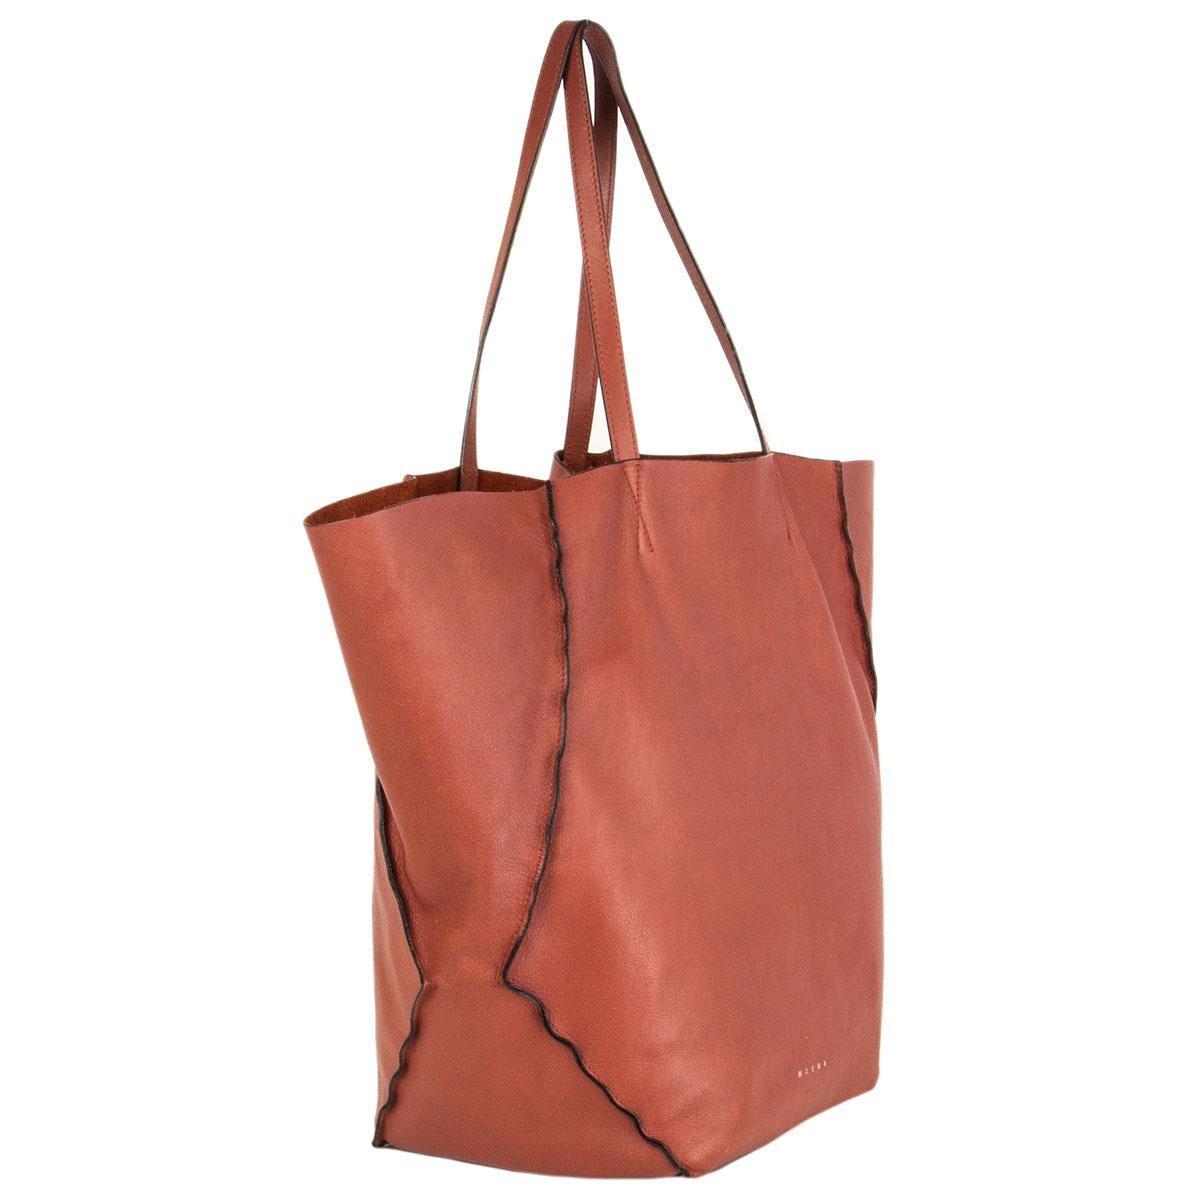 100% authentic Marni hobo tote shoulder bag in rust lambskin and black painted edges. Unlined. Comes with a detachable zipper leather pouch. Has been worn with some soft pen-marks on the inside bottom. Overall in very good condition.